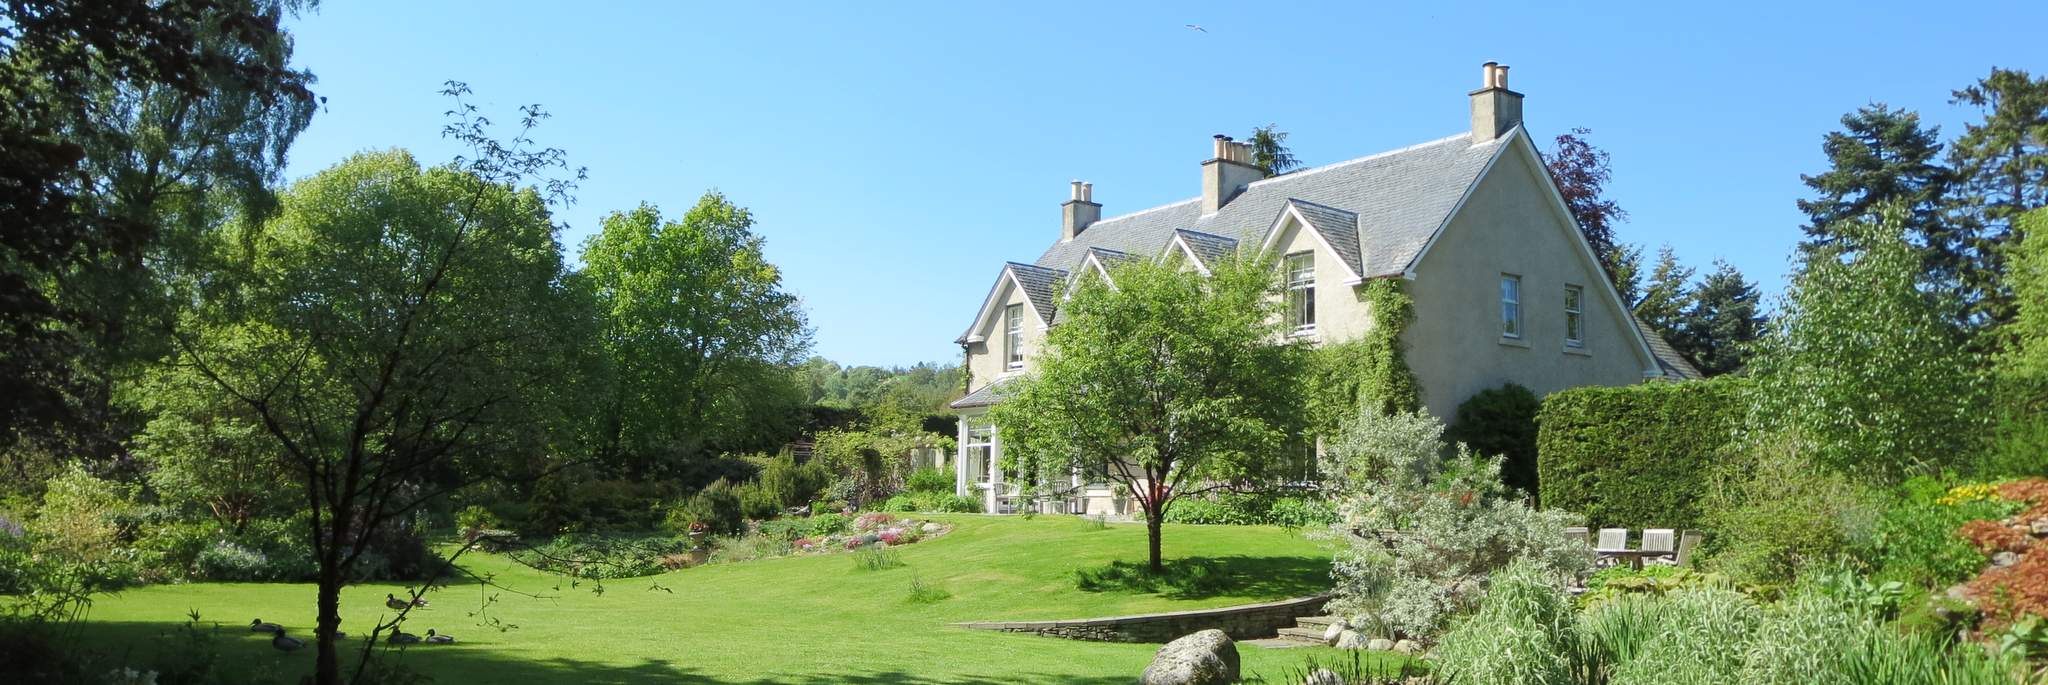 The Dulaig B&B in the Scottish Highlands